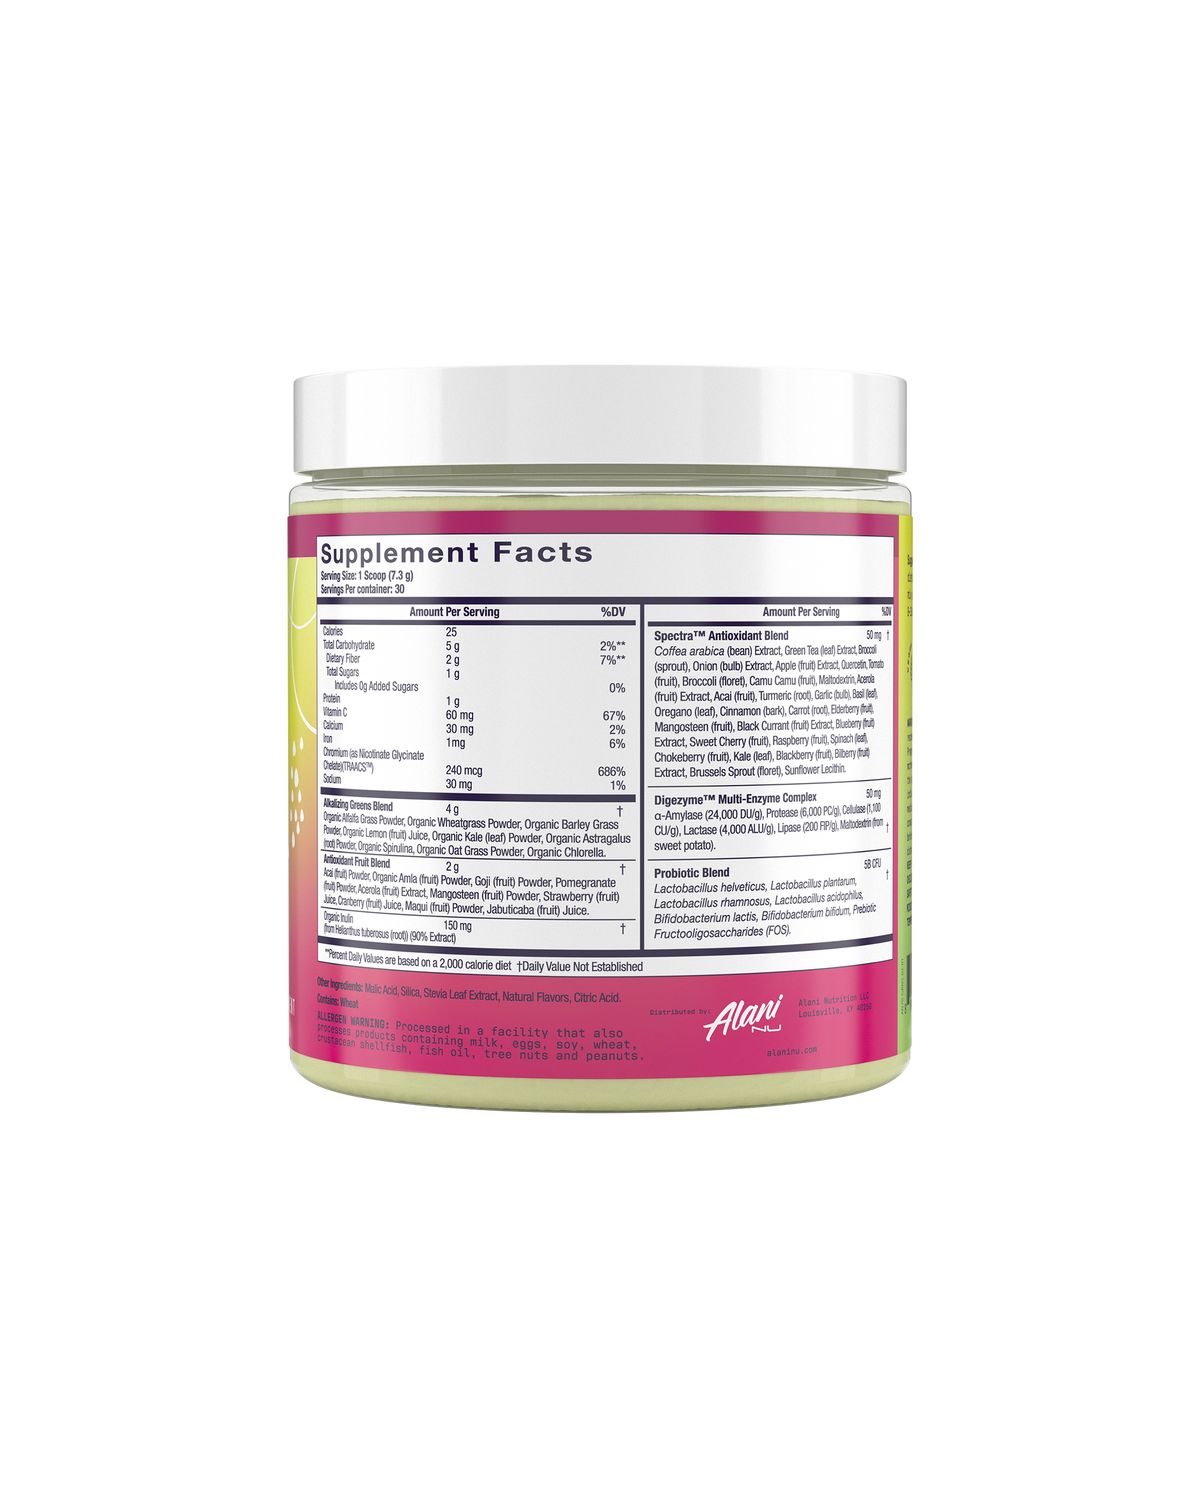 A back view of Super Greens in Wild Berry flavor highlighting supplement facts.